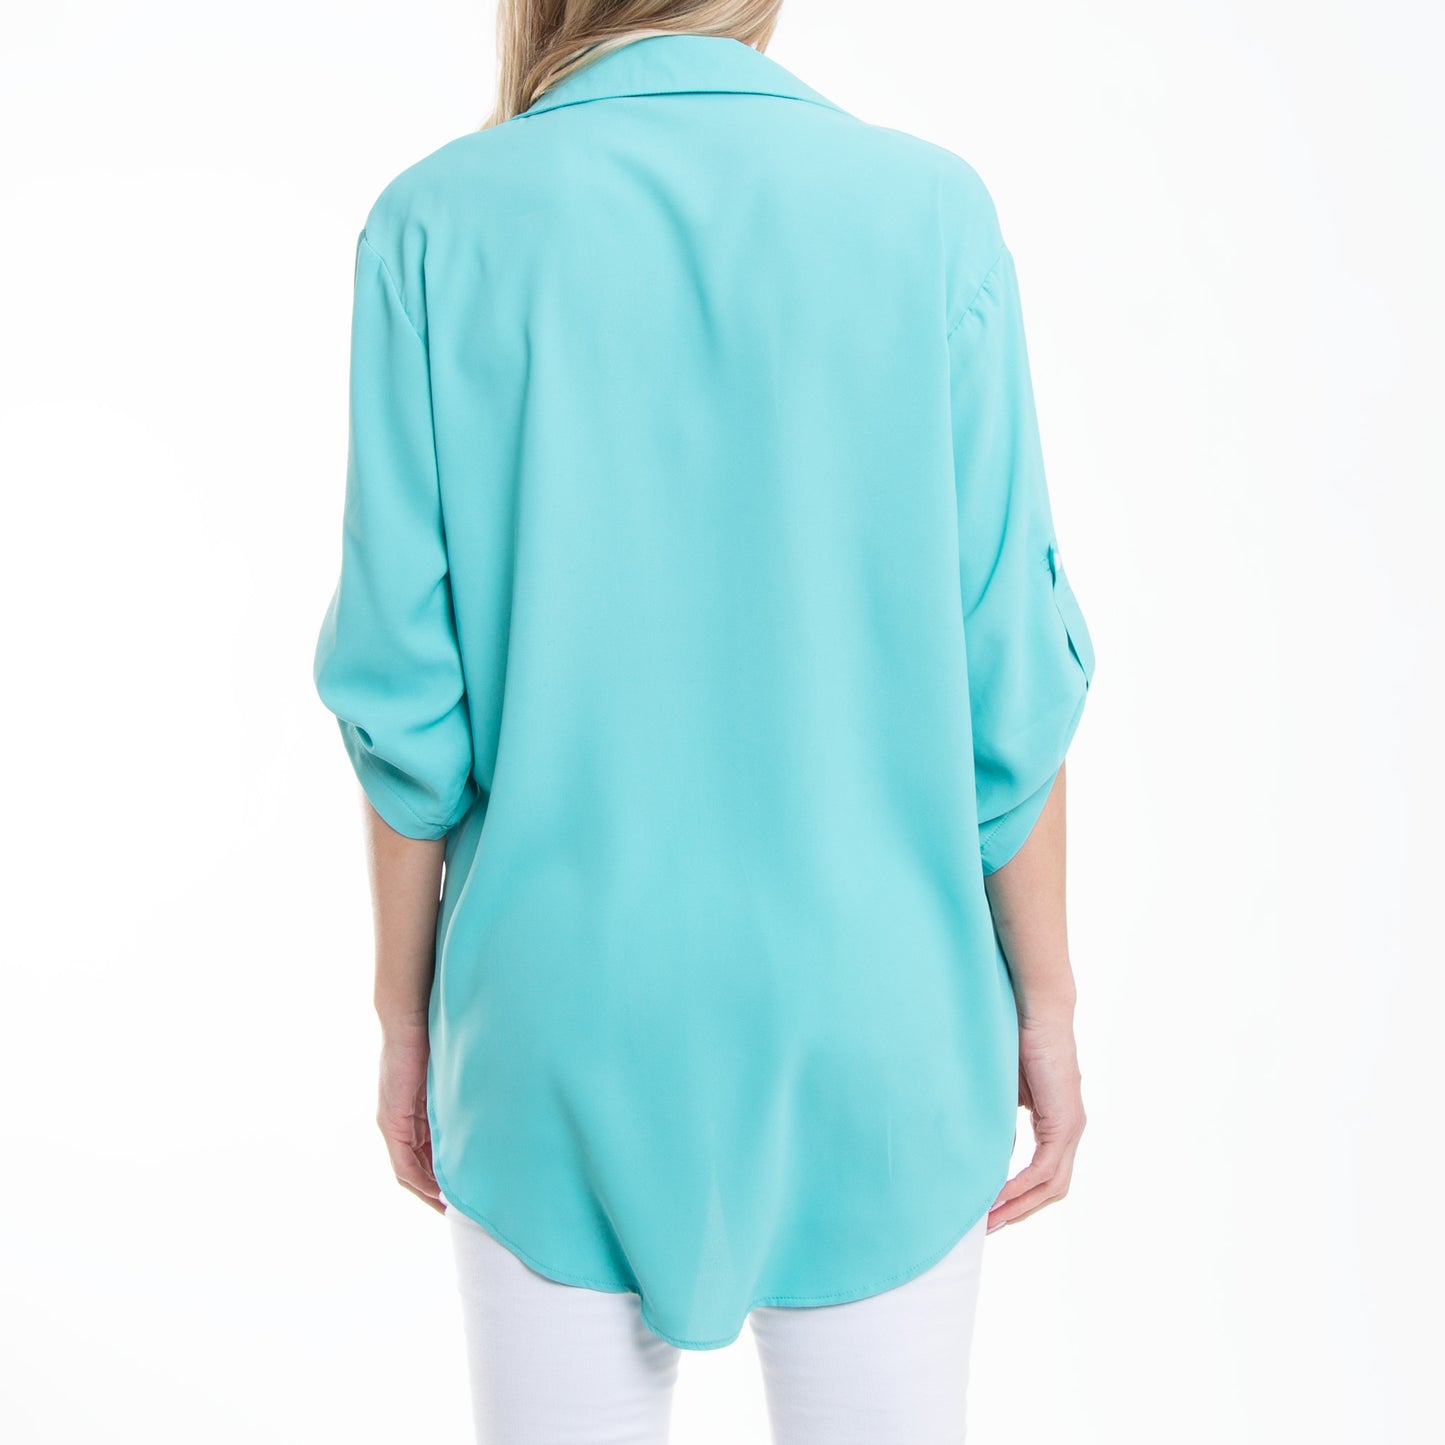 Amaris Collared Relaxed Fit Half Sleeve V-Neck Blouse